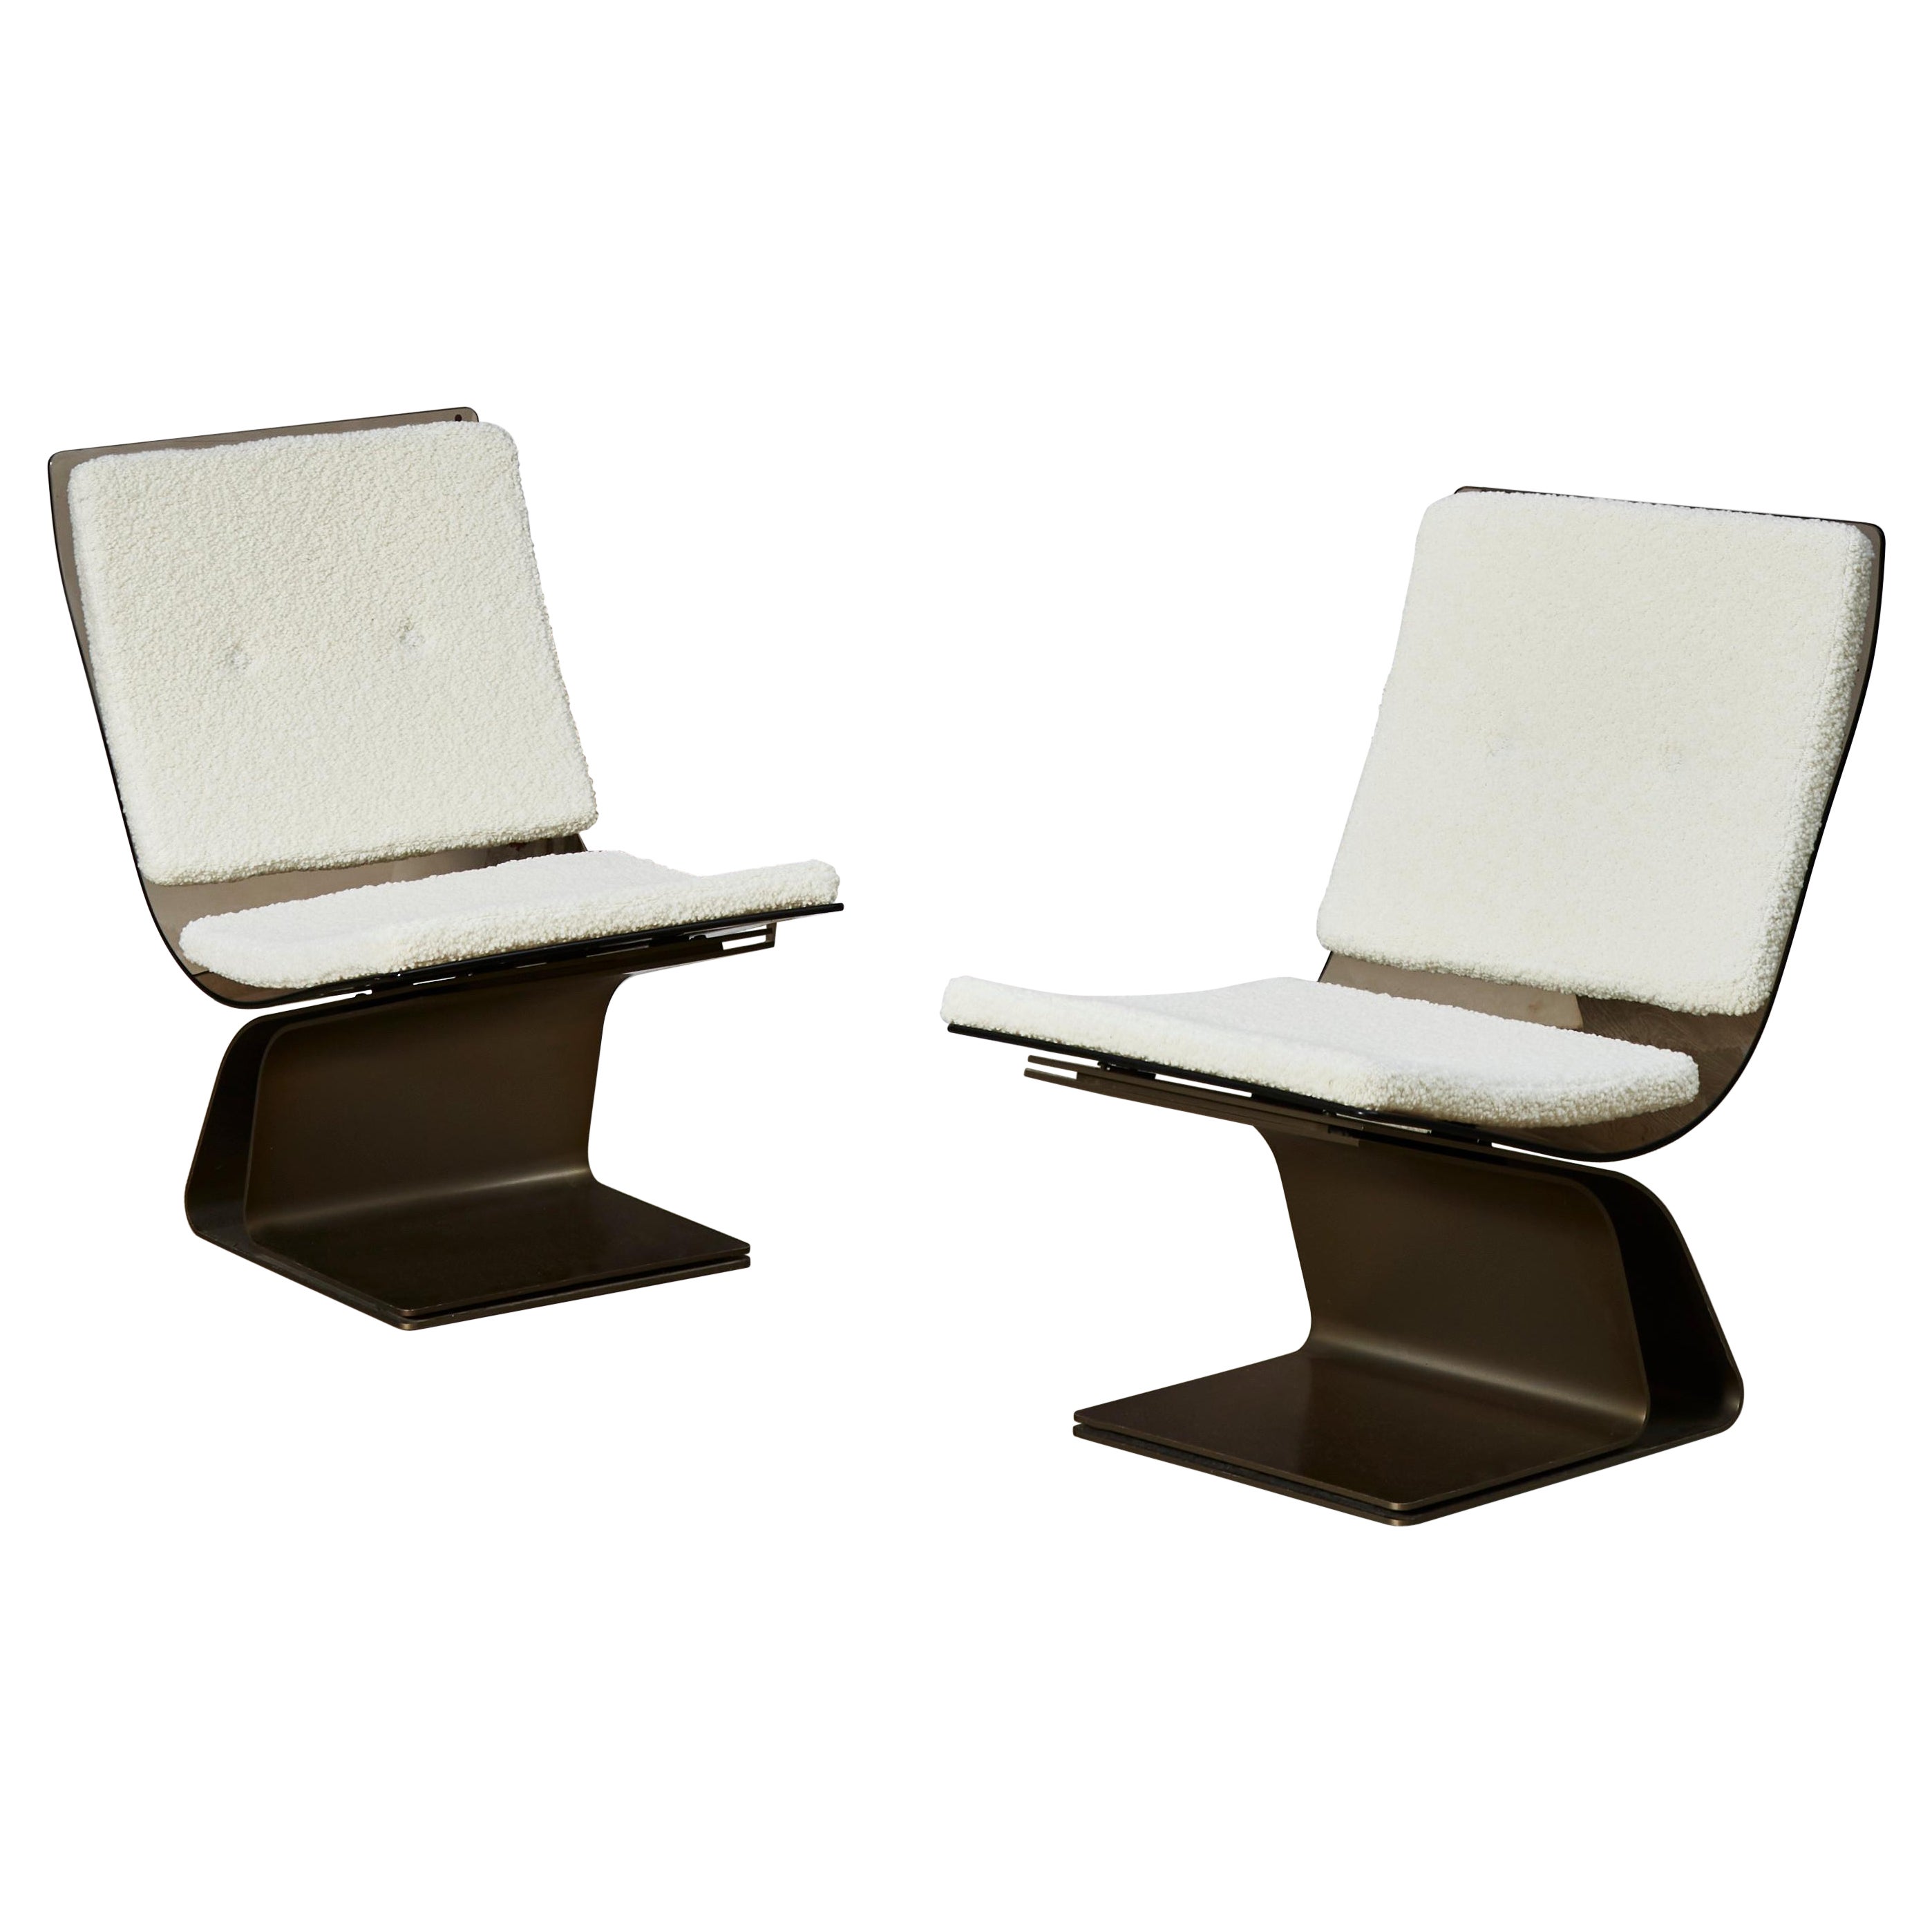 Vintage Chairs by Maison Jansen, 60s For Sale